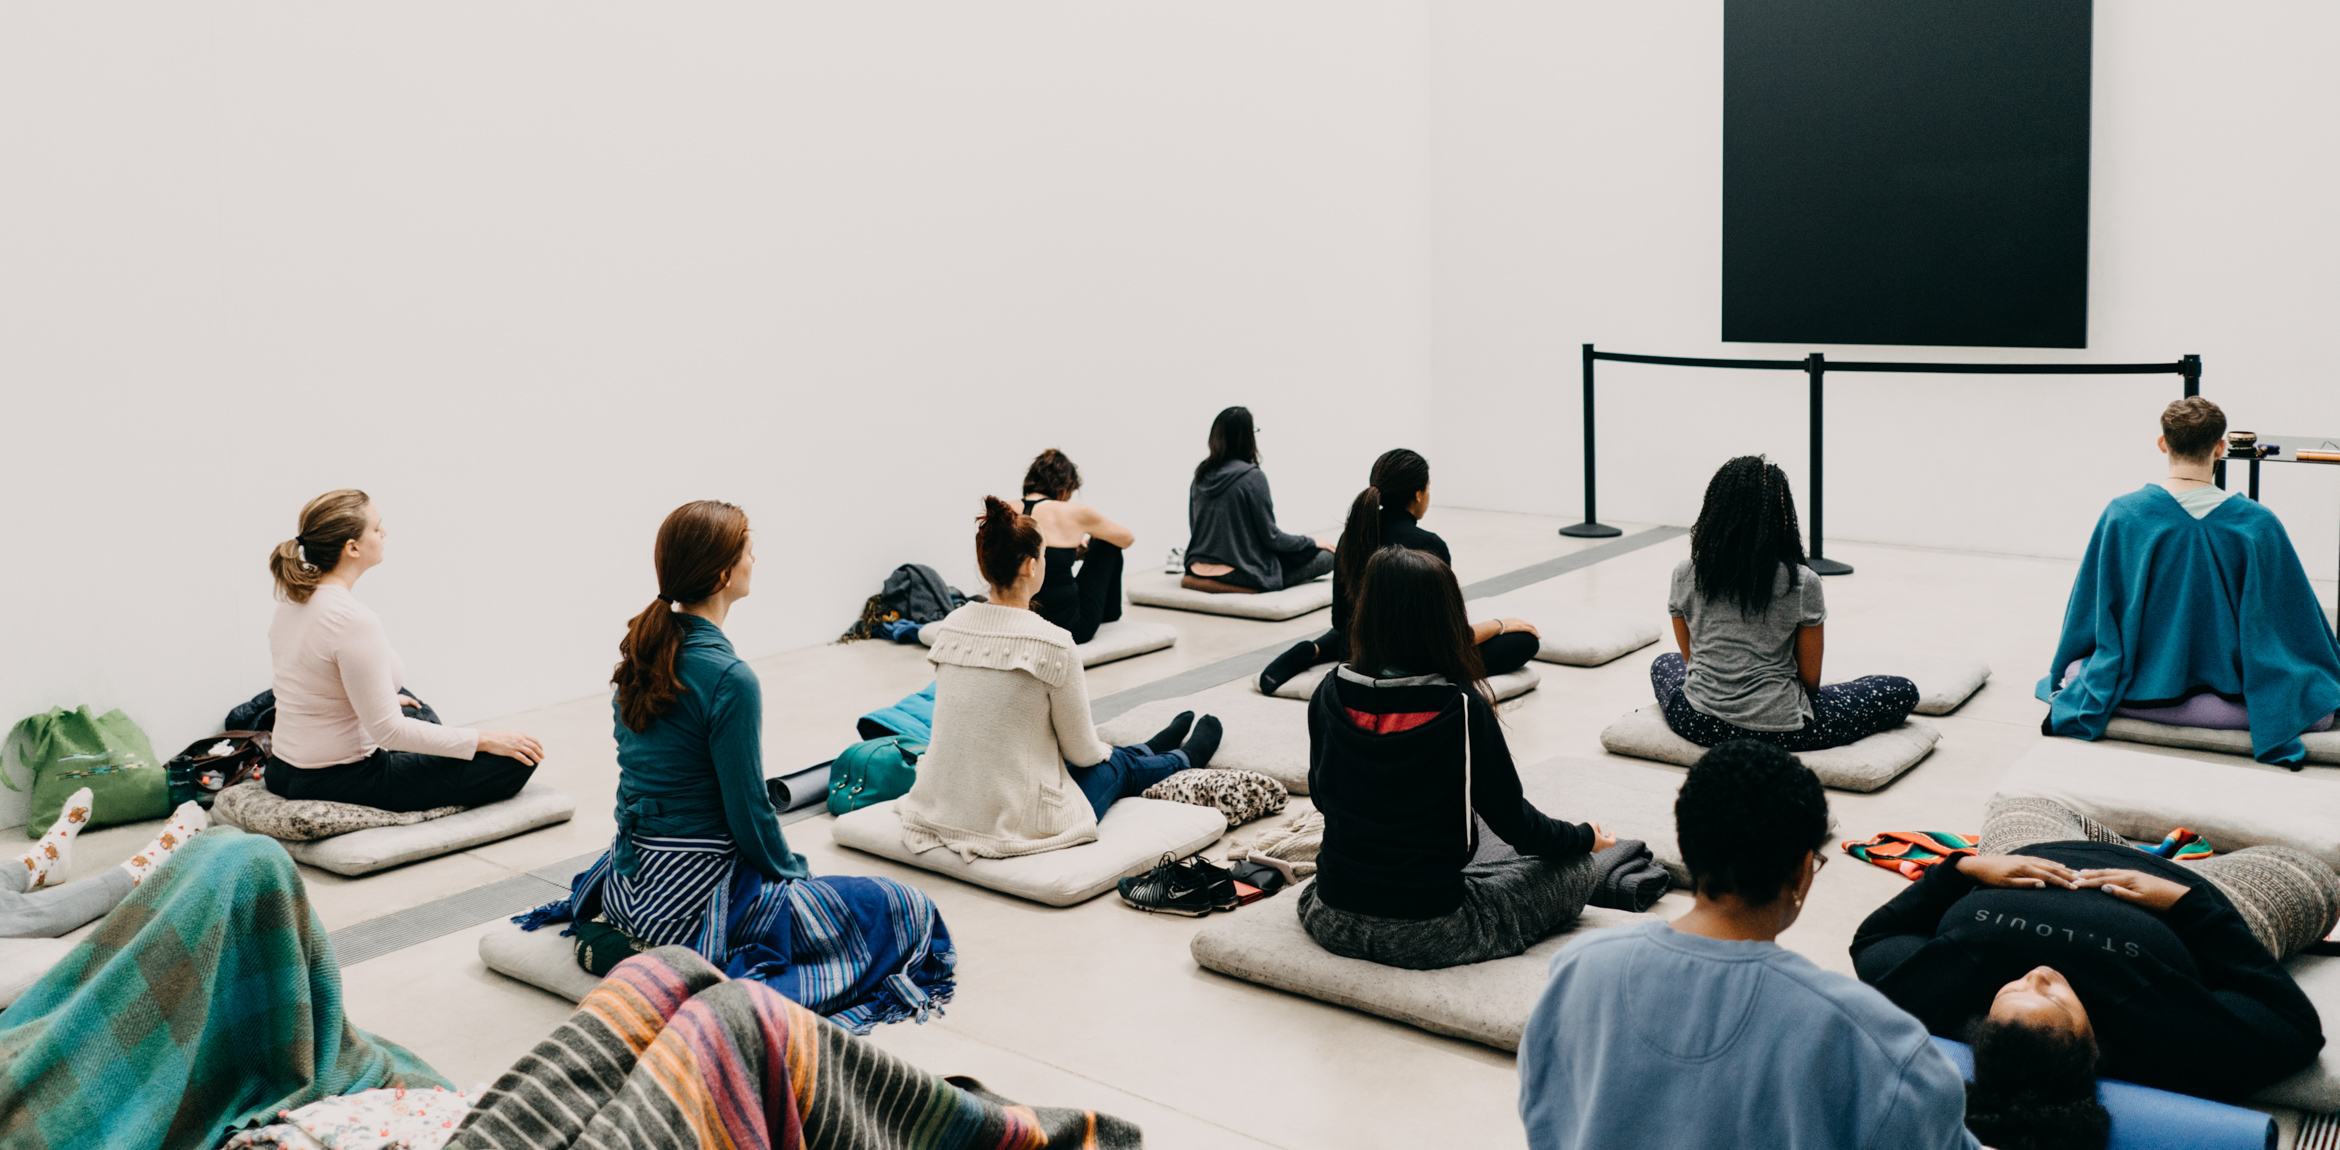 Guests sit on cushions in the Lower Main Gallery in meditative poses, facing Ellsworth Kelly's 